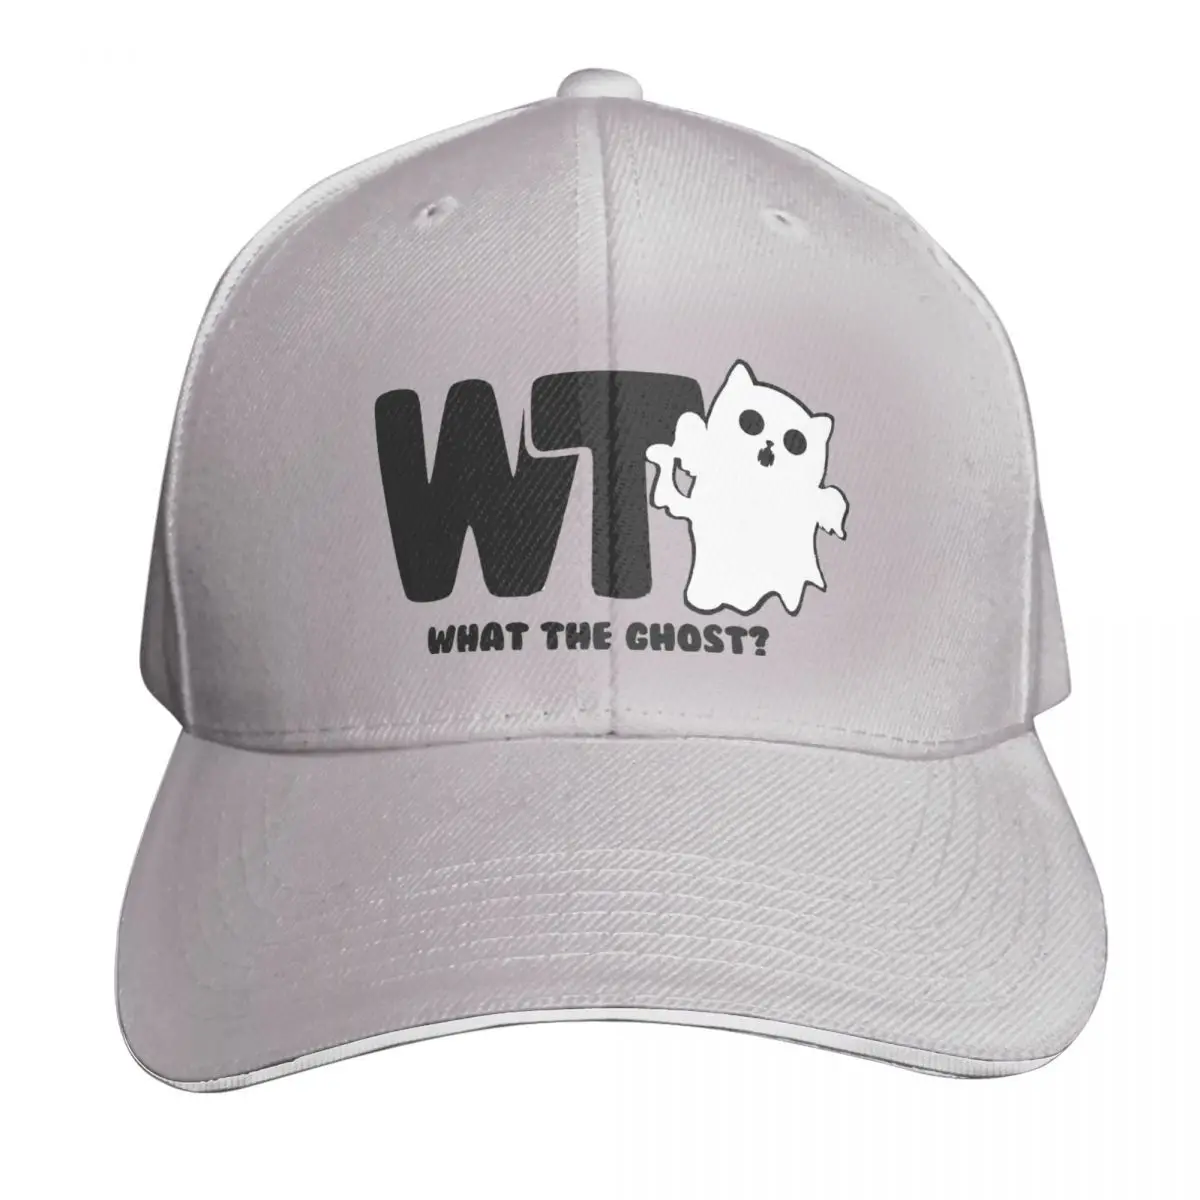 

What The Ghost Casquette, Polyester Cap Fashionable Moisture Wicking Nice Gift